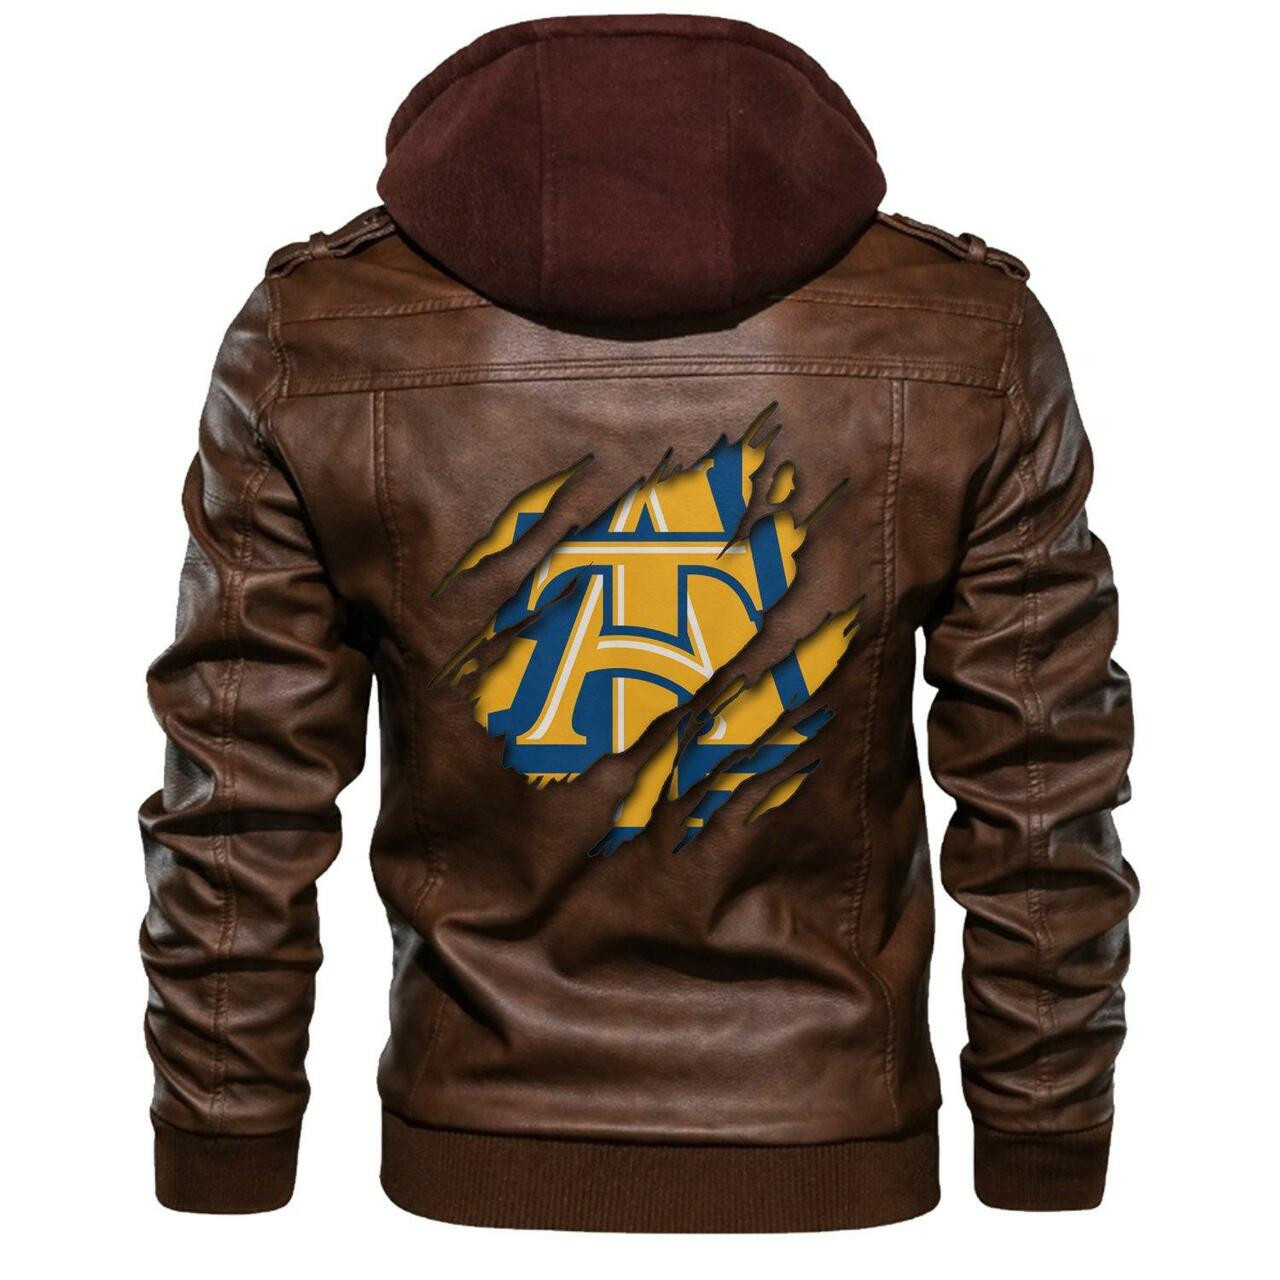 These Amazing Leather Jacket will add to the appeal of your outfit 170